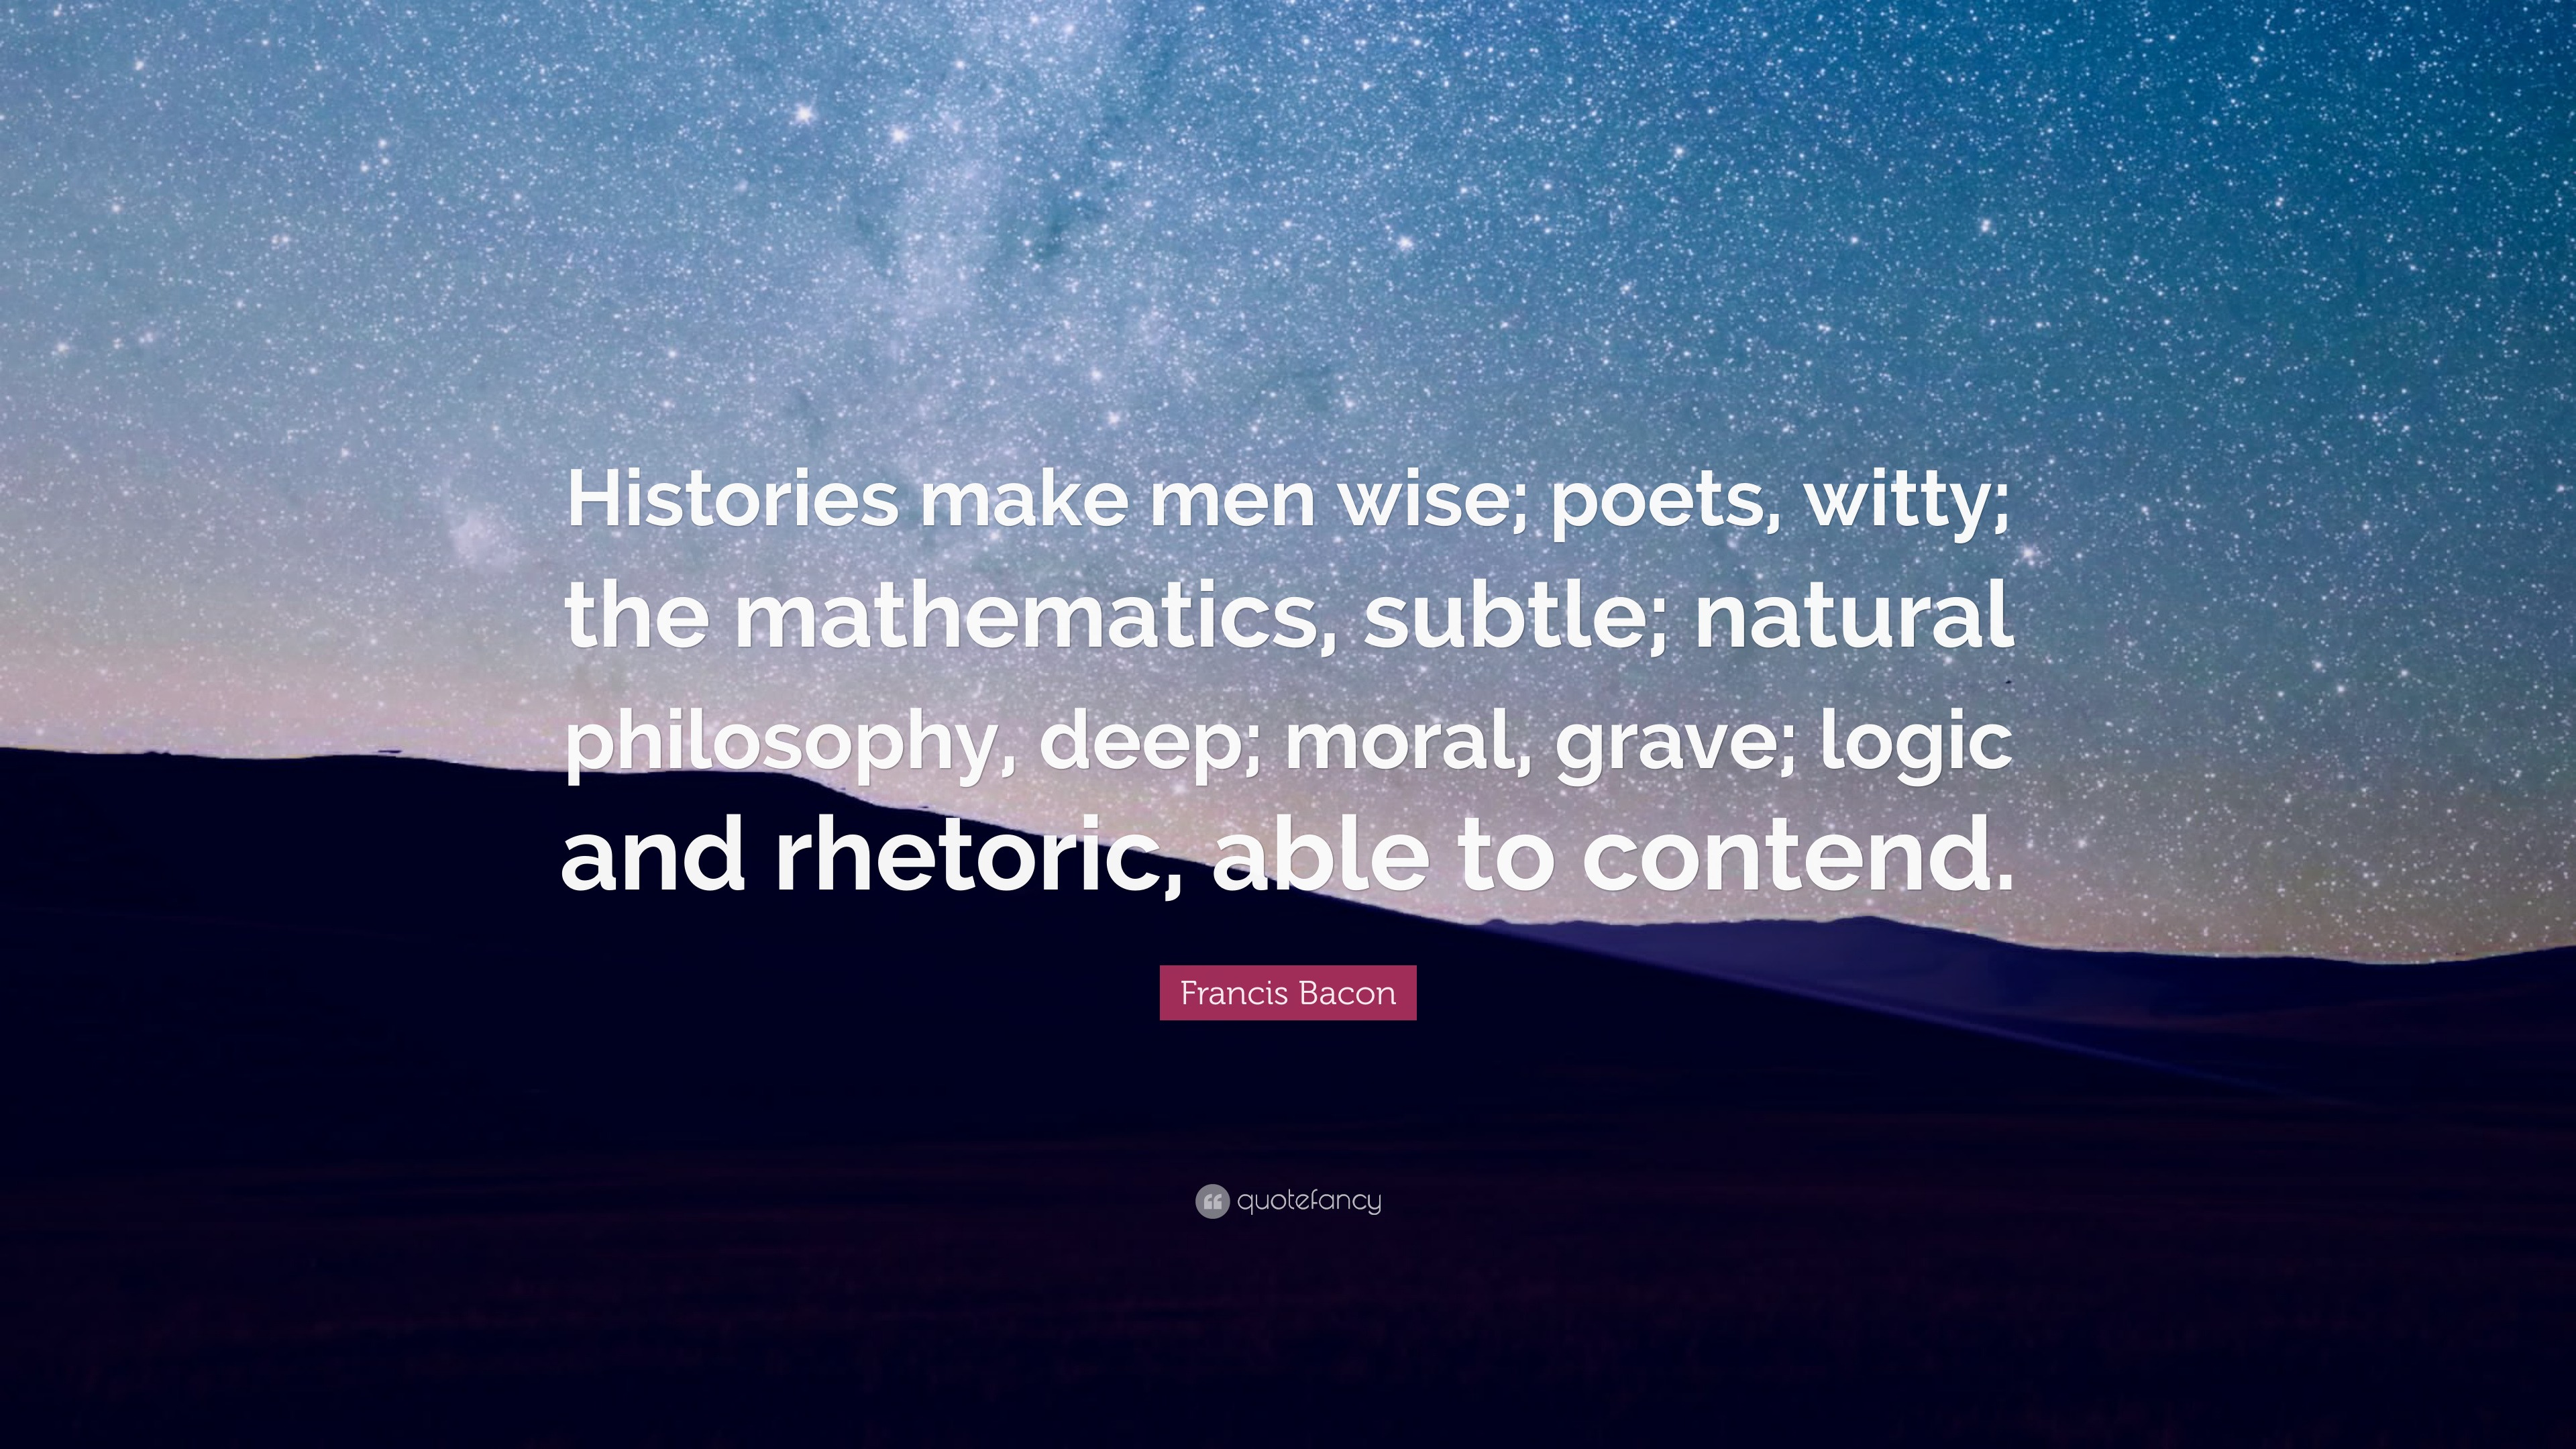 Francis Bacon Quote: “Histories make men wise; poets, witty; the